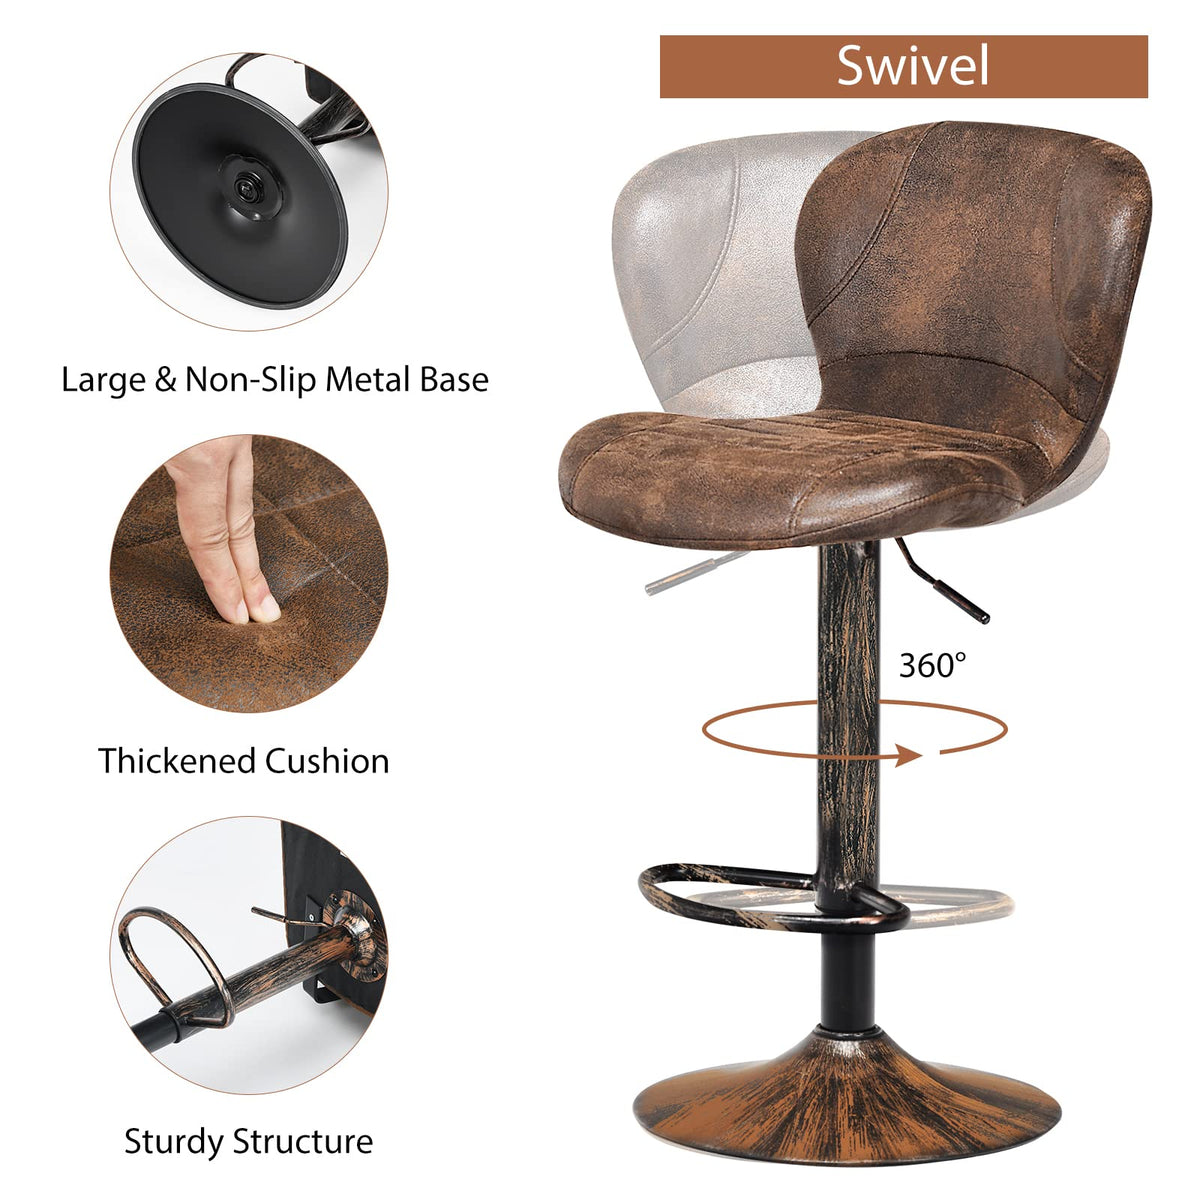 Giantex Bar Stools Set of 2, Adjustable Swivel Barstools with Back, Hot-Stamping Cloth and Chrome Footrest, Retro Brown